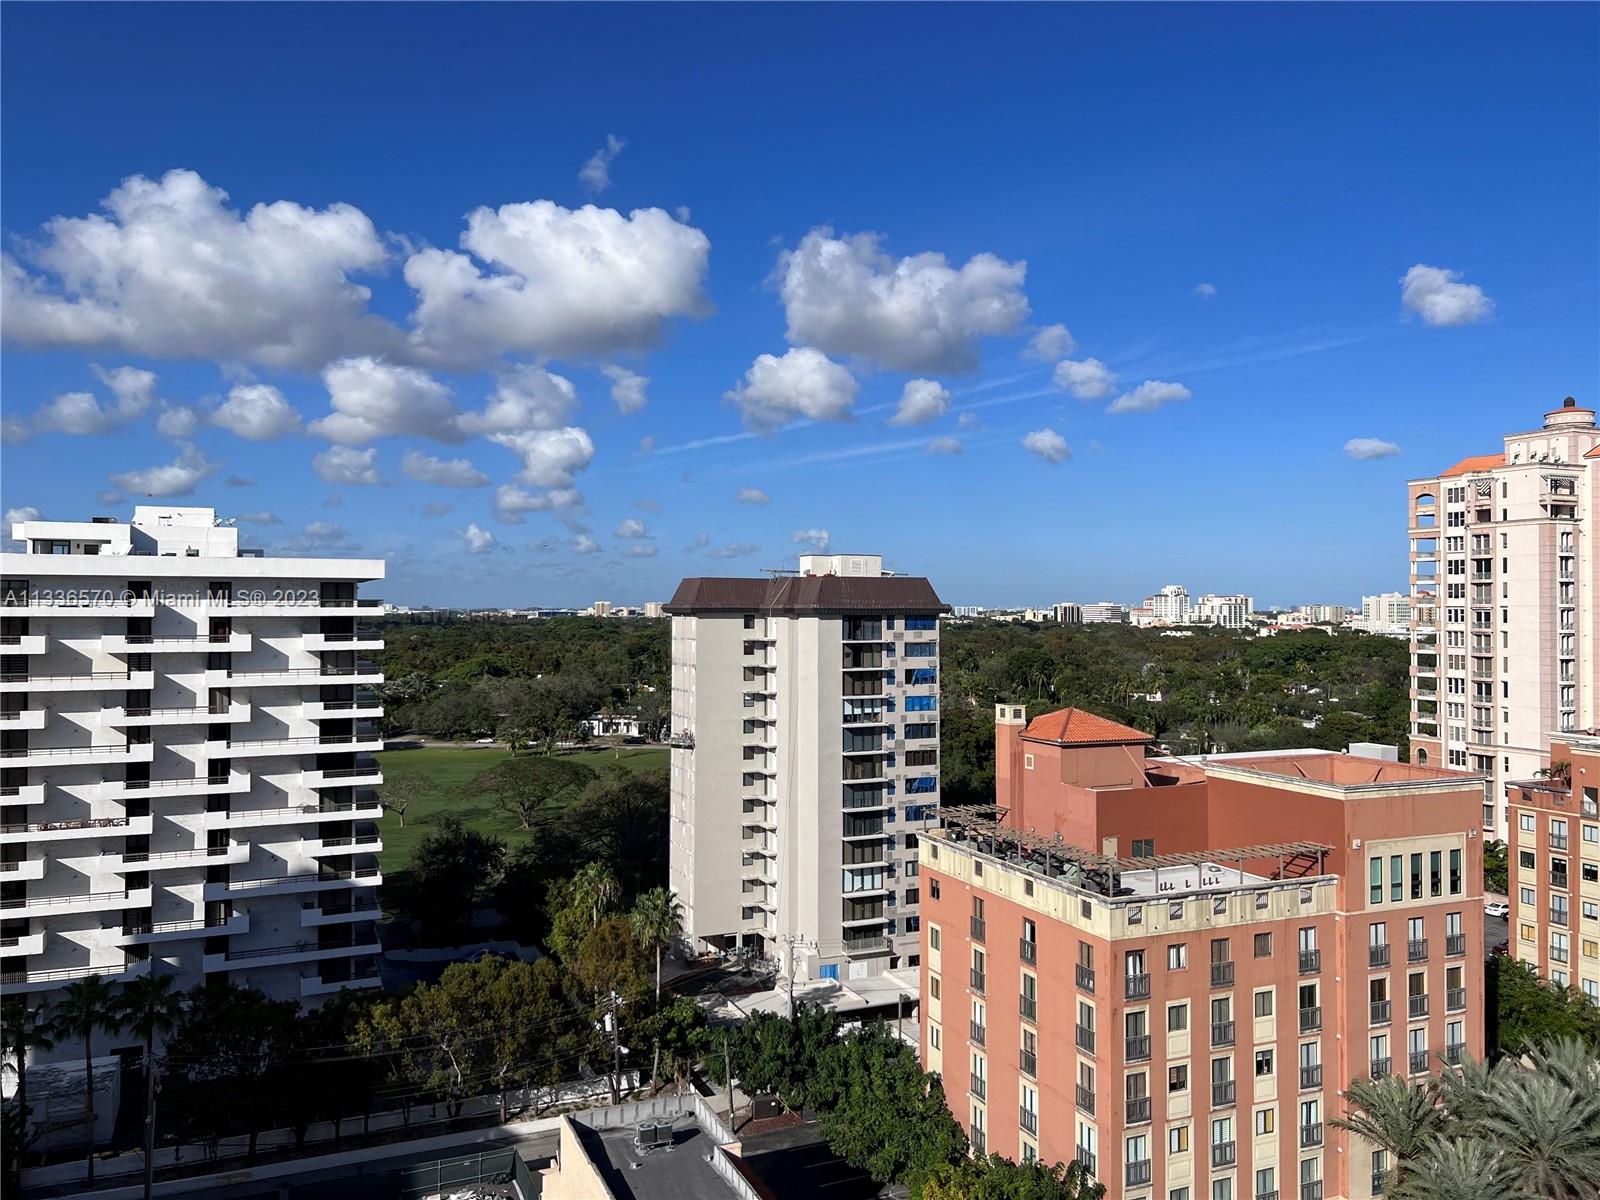 Beautiful fully furnished PH studio with balcony and spectacular view of Gables skyline, Granada Golf course. 1 assigned parking space. Electricity, water/sewer, basic cable, hot water, A/C are all included. The David William Condo has a great location, close to Downtown Coral Gables' shops, restaurants & University of Miami.  For showings see broker remarks. 24-hour notice text only.